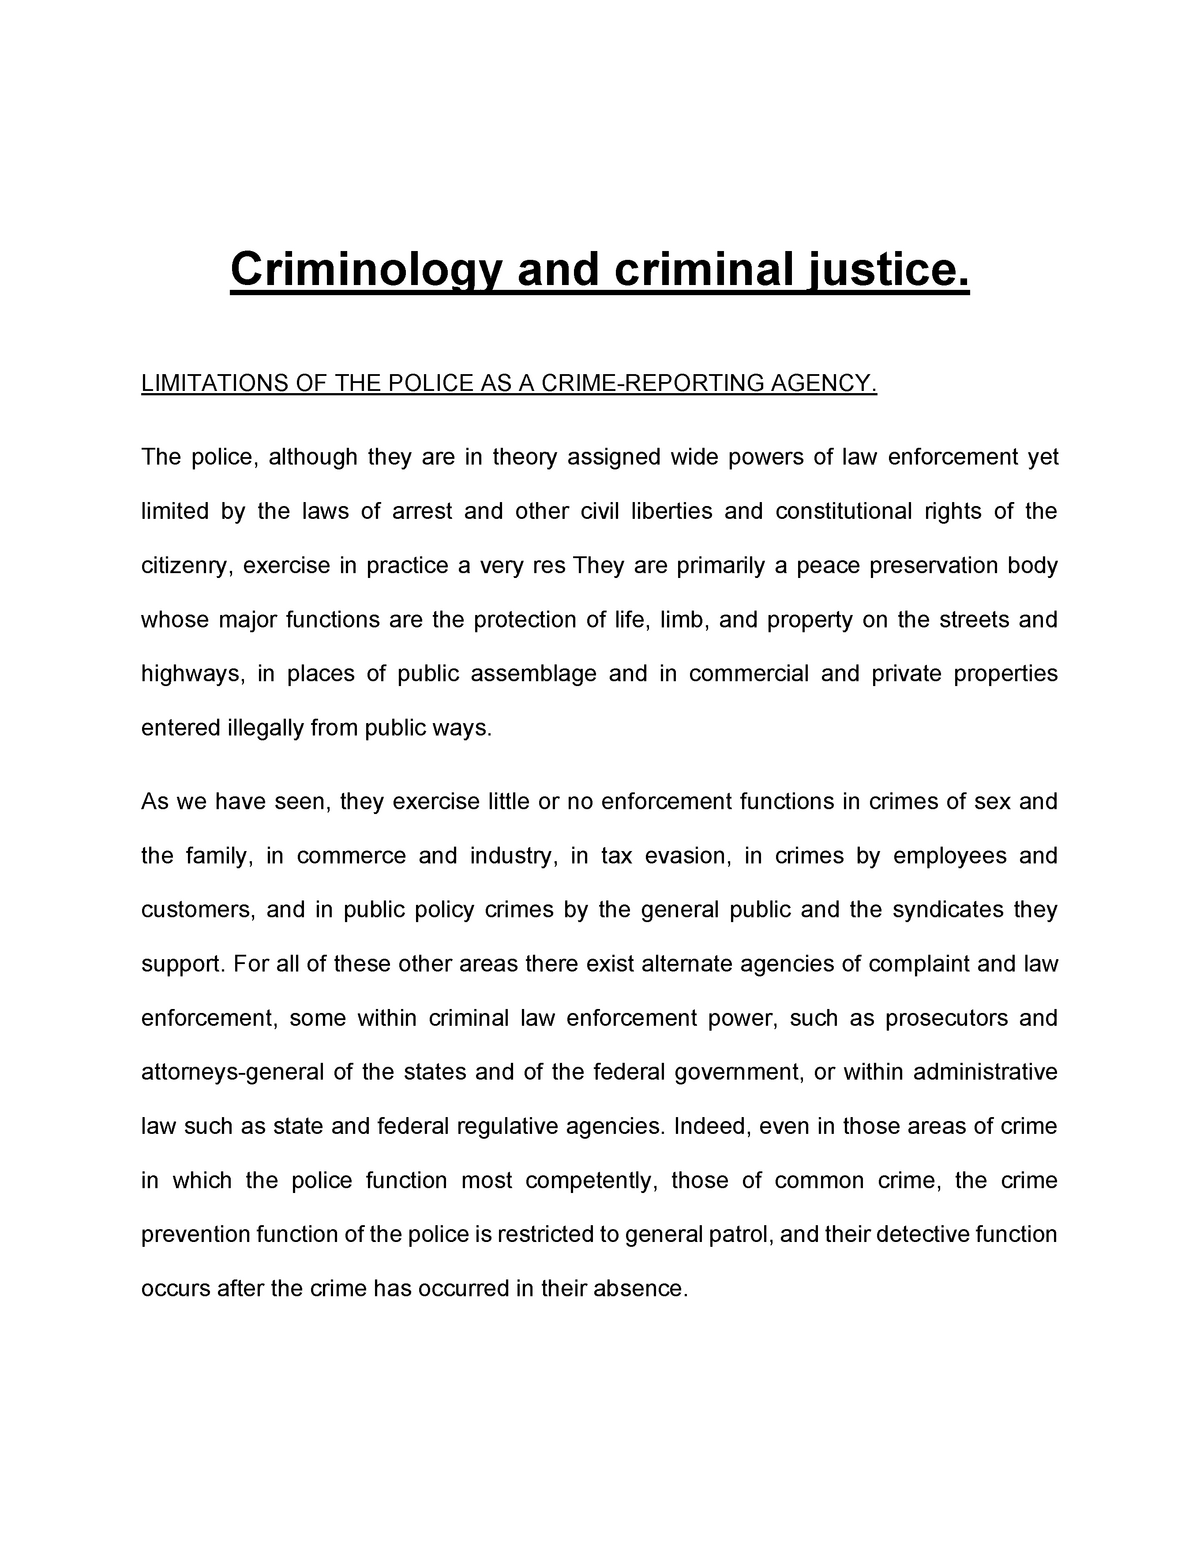 limitations of crime research